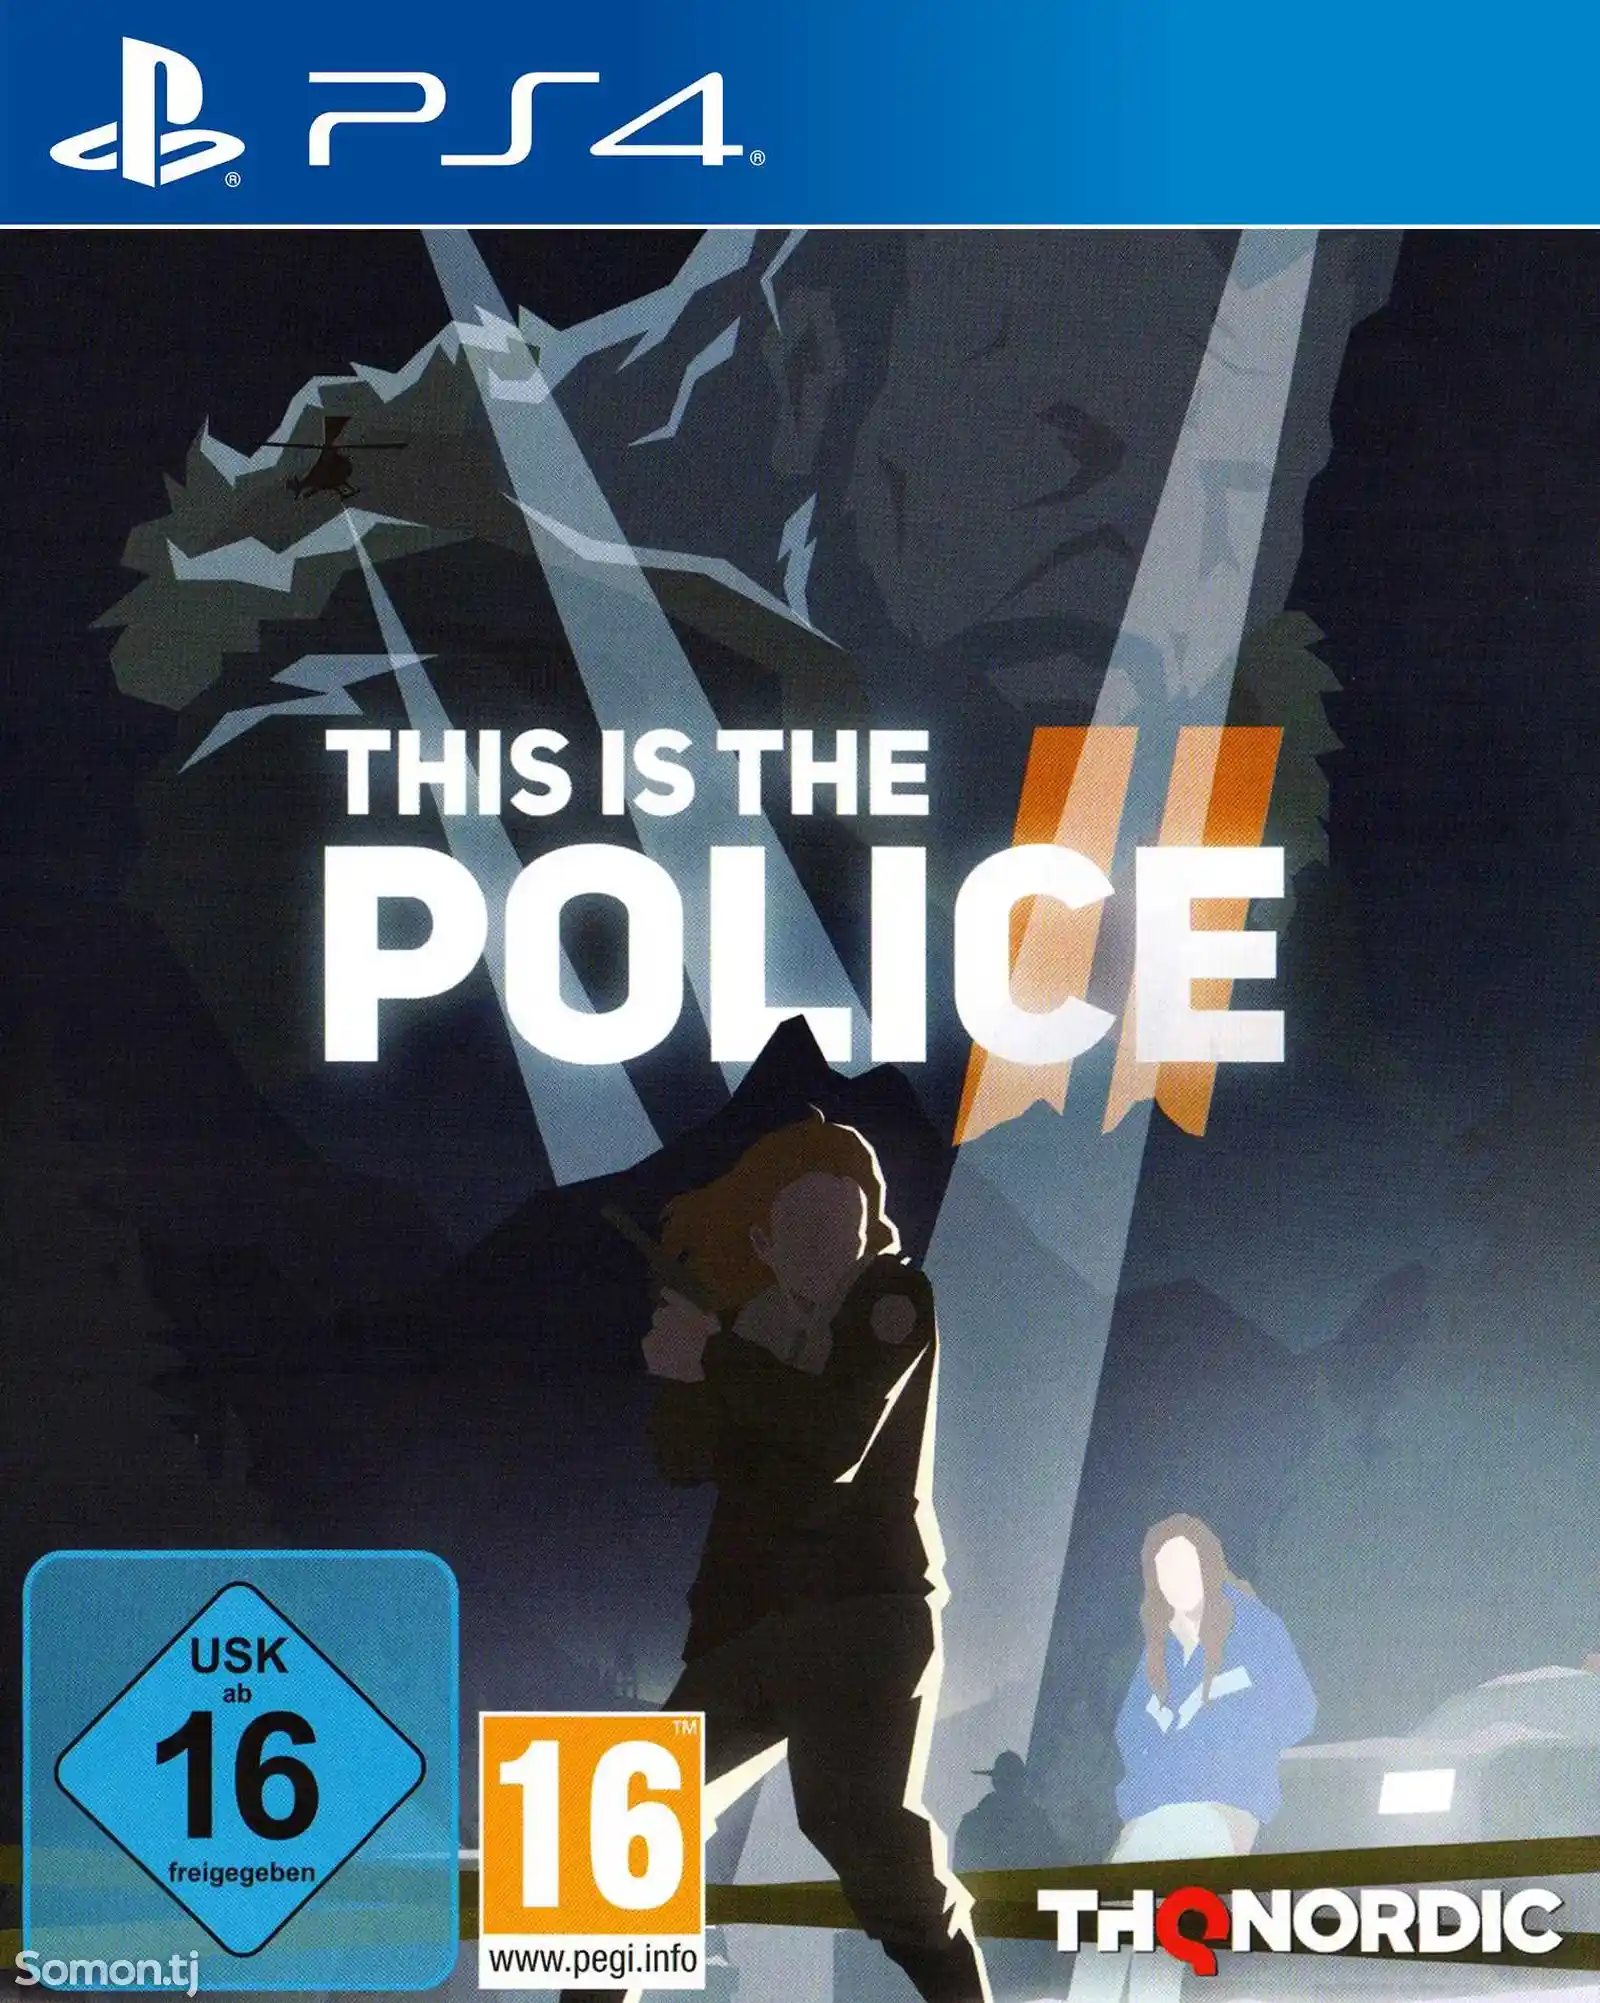 Игра This is the police 2 для PS-4 / 5.05 / 6.72 / 7.02 / 7.55 / 9.00 /-1